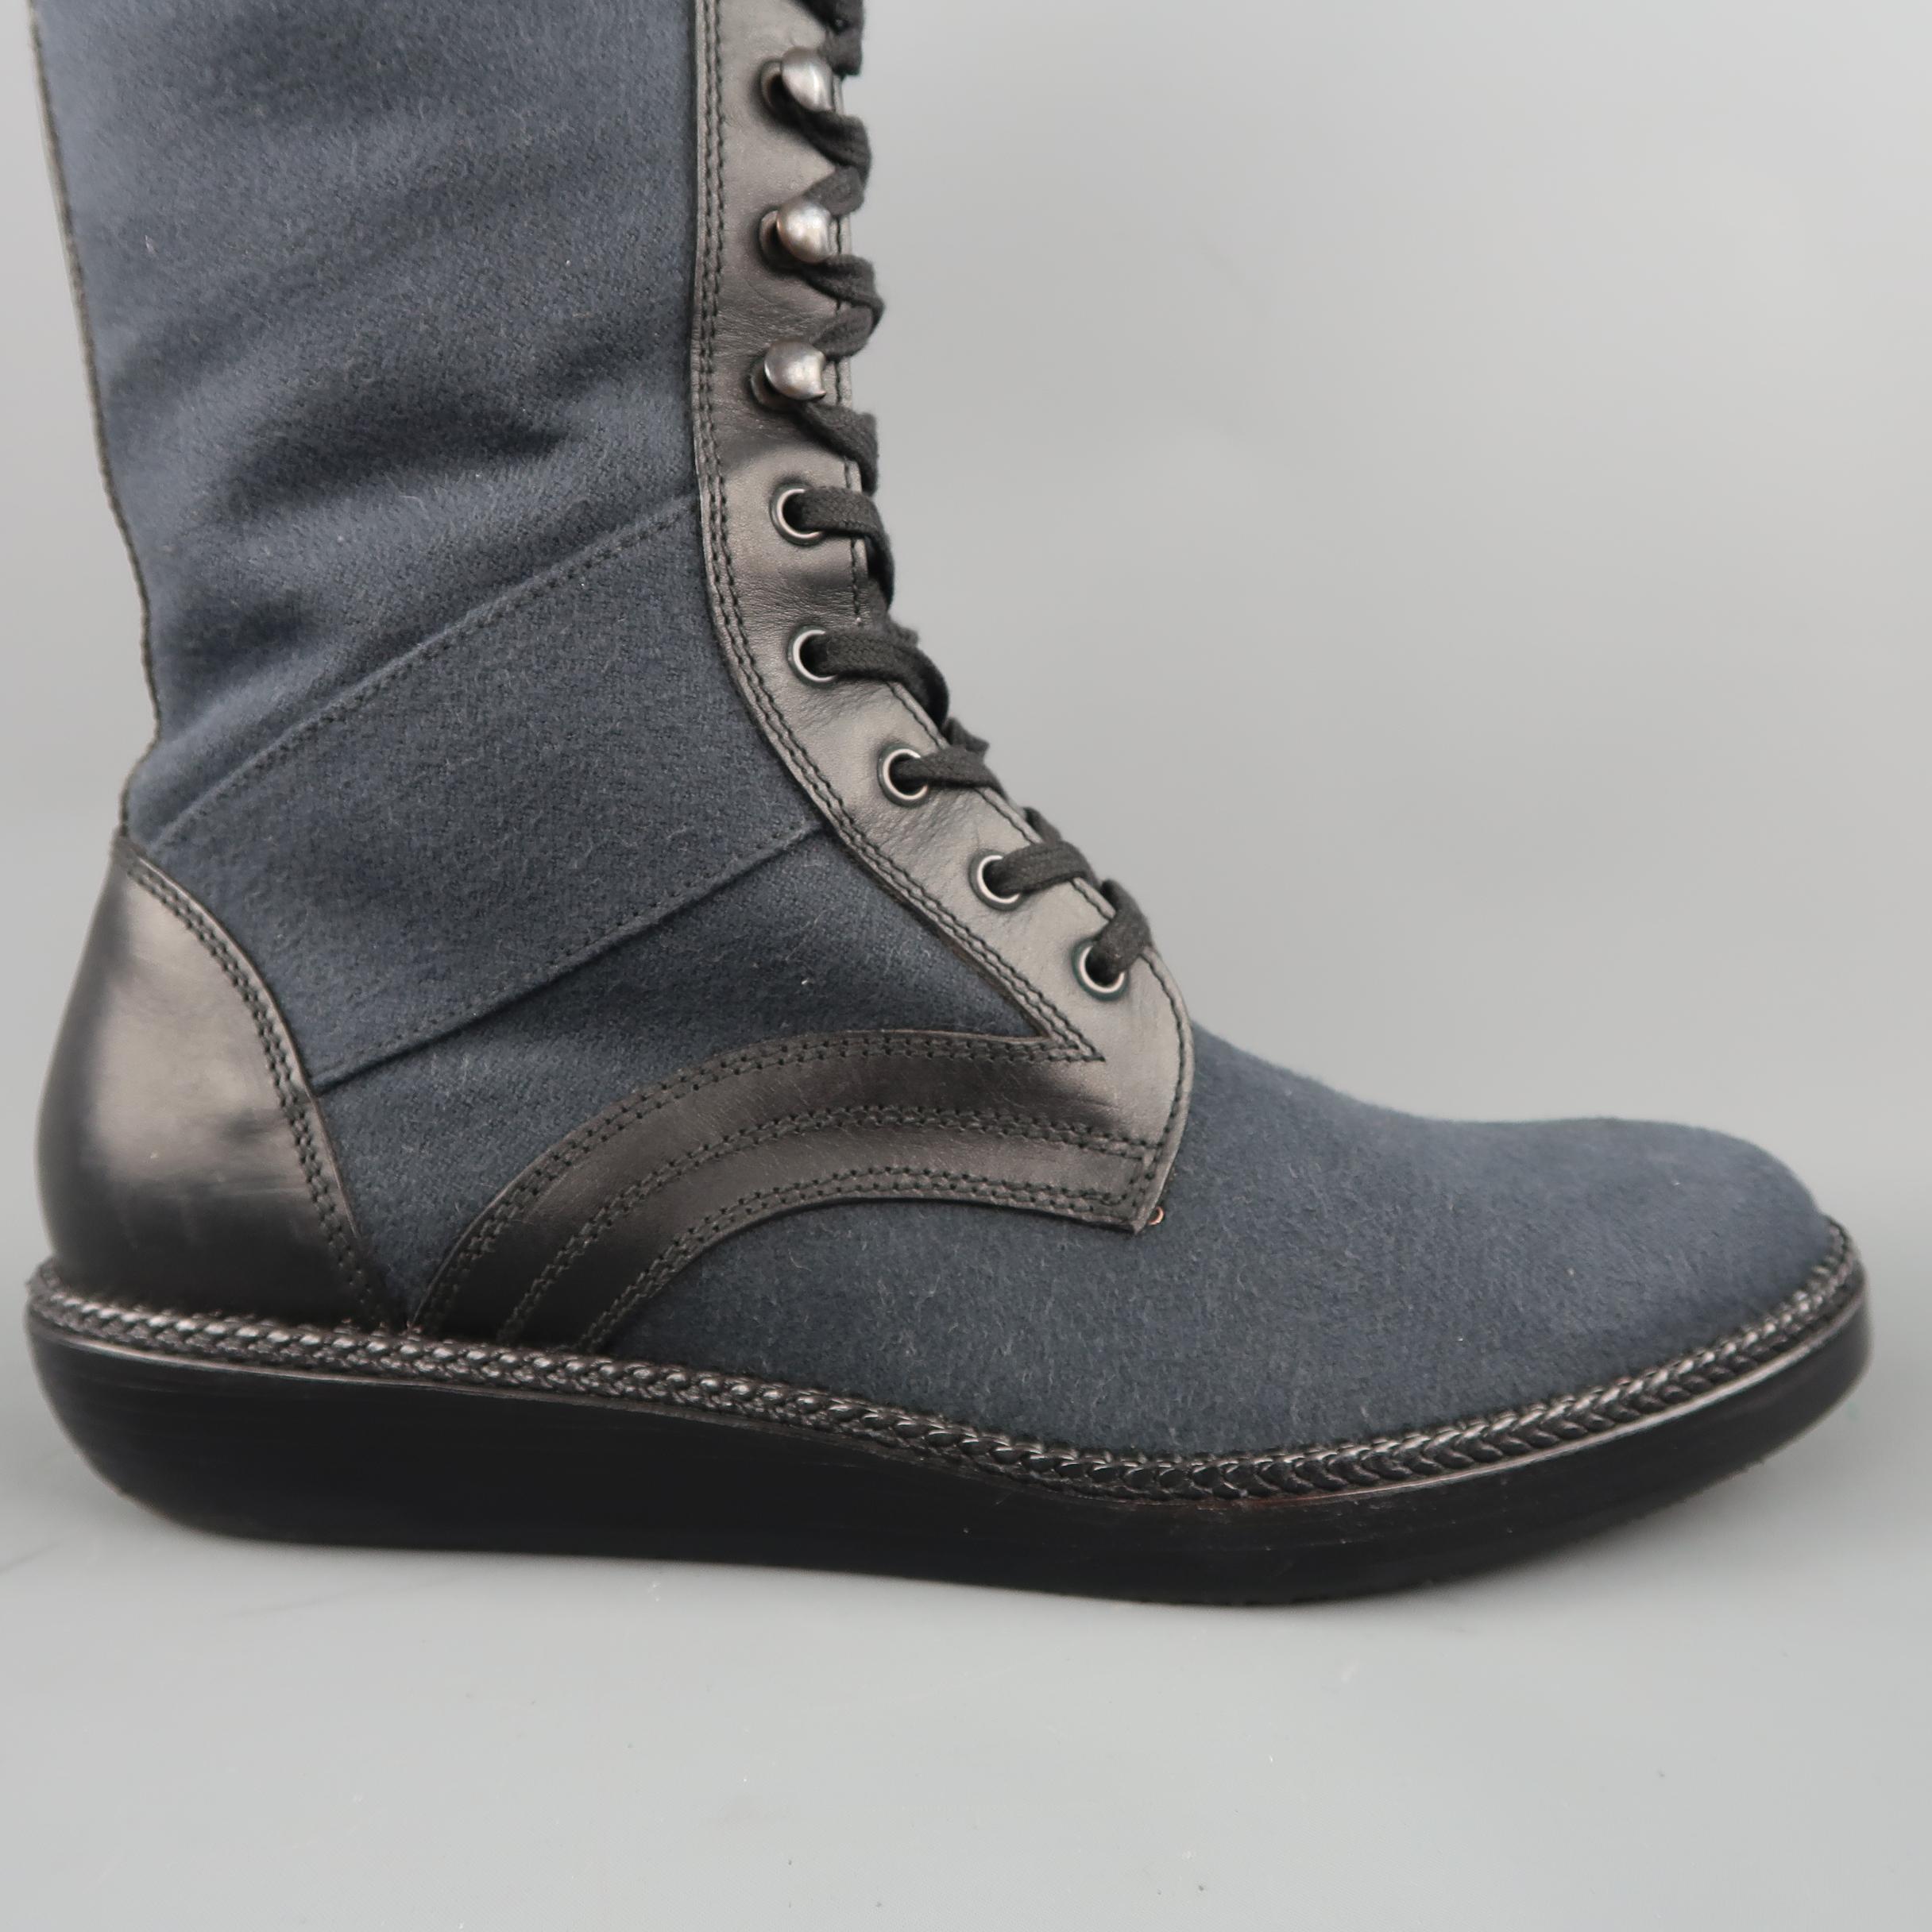 LANVIN tall boots come in muted navy blue brushed cotton canvas with black leather trim and heel, lace up front with ski hooks, and chunky sole. With box. Hand Made in Italy.
 
Excellent Pre-Owned Condition.
Marked: UK 8
 
Measurements:
 
Length: 12